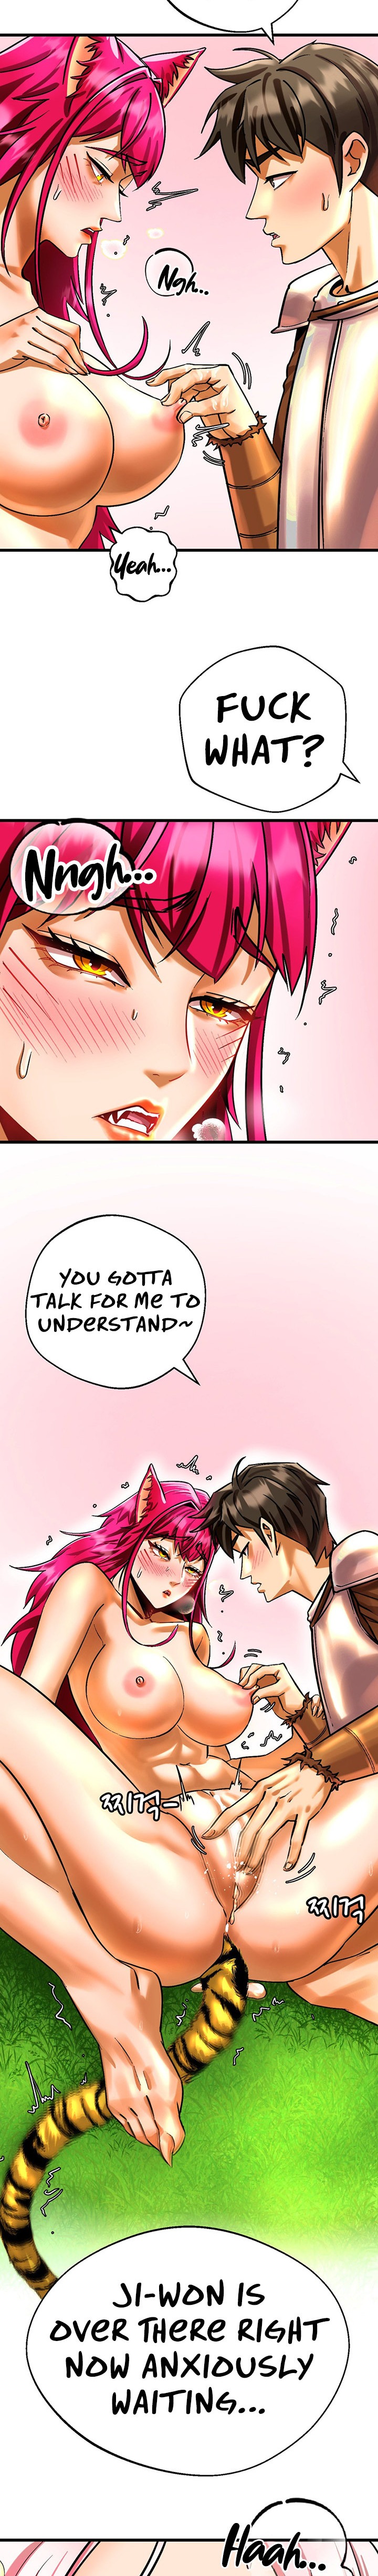 Farming with Girls - Chapter 6 Page 4